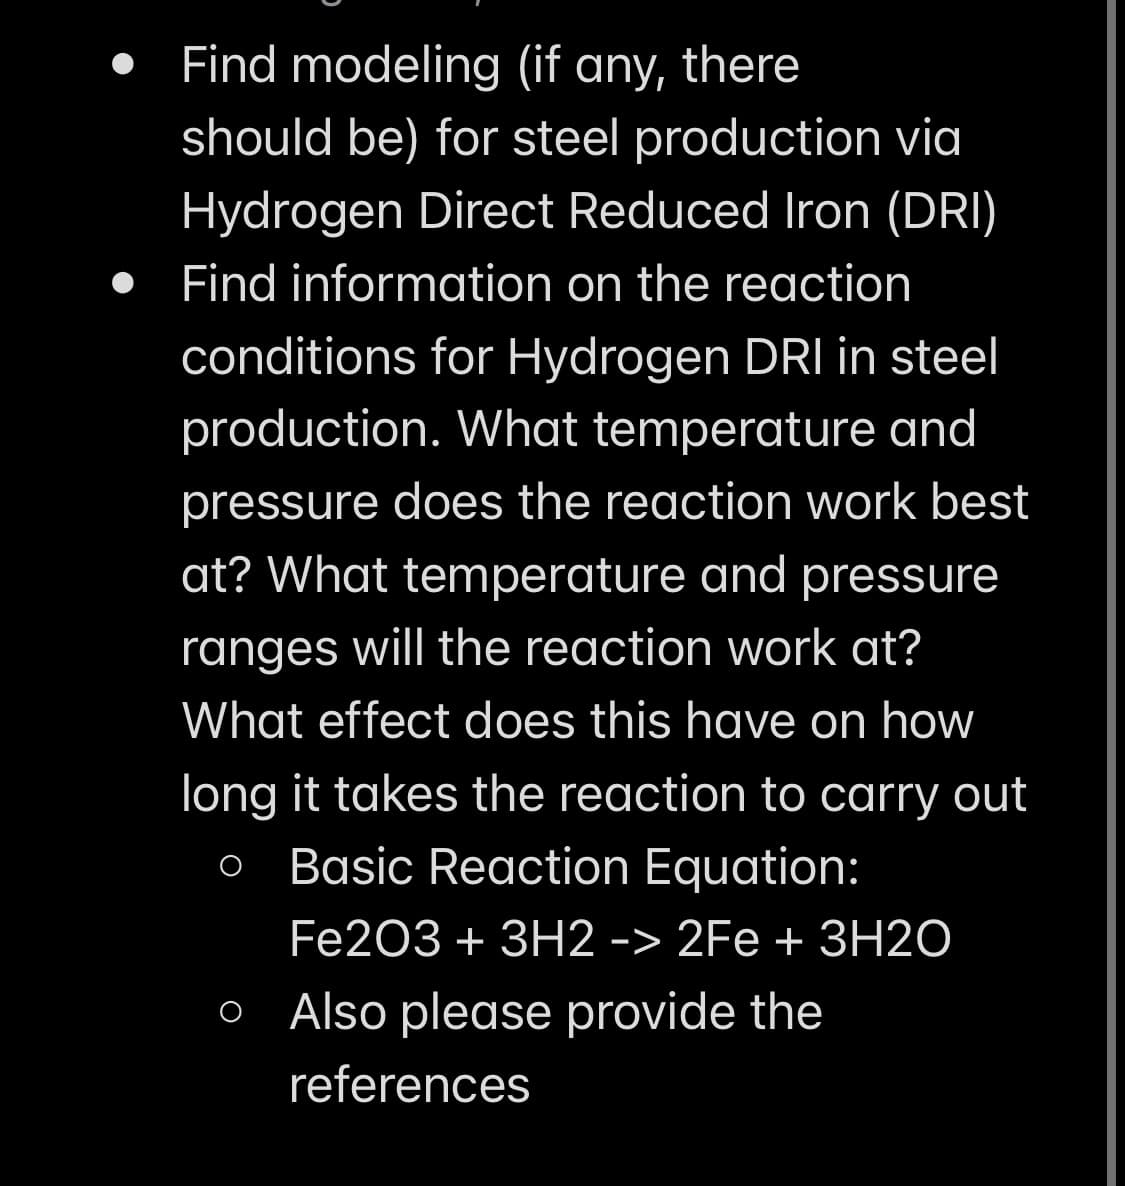 Find modeling (if any, there
should be) for steel production via
Hydrogen Direct Reduced Iron (DRI)
Find information on the reaction
conditions for Hydrogen DRI in steel
production. What temperature and
pressure does the reaction work best
at? What temperature and pressure
ranges will the reaction work at?
What effect does this have on how
long it takes the reaction to carry out
O Basic Reaction Equation:
Fe2O3 + 3H2 -> 2Fe + 3H2O
Also please provide the
references